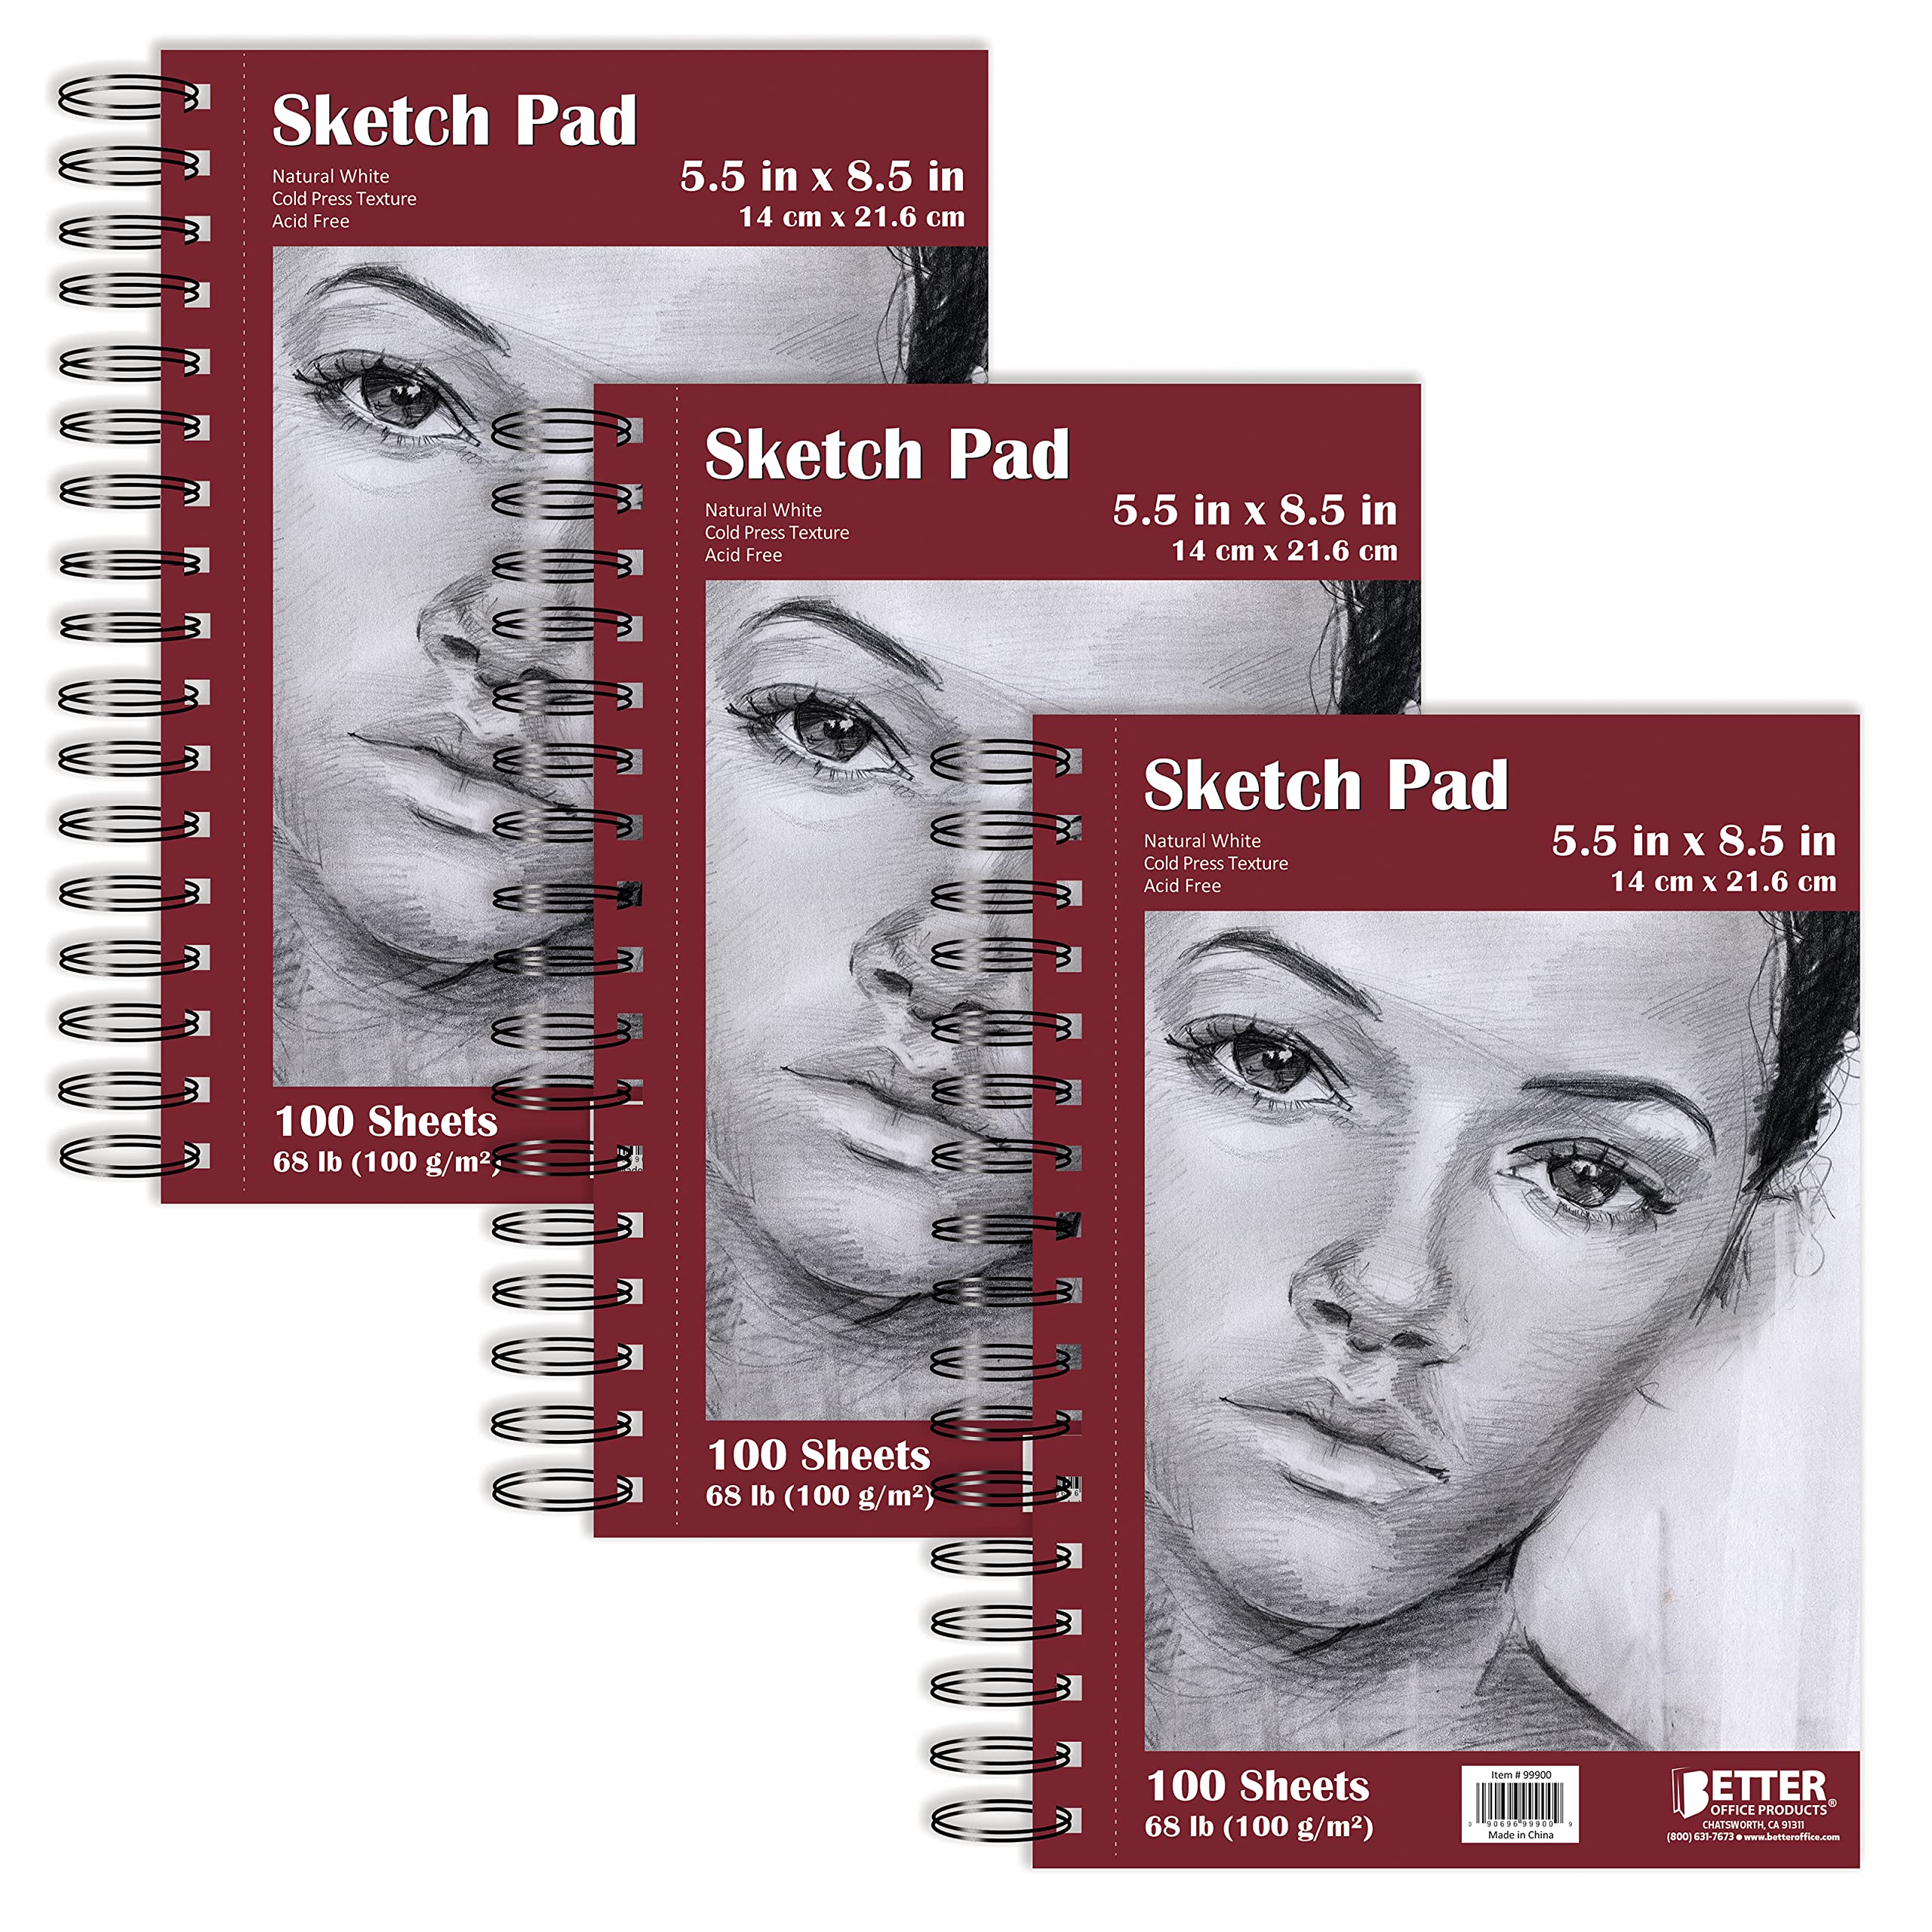 3-Pack 100-Page 5.5" x 8.5" Spiral Bound Artist Sketch Paper Pads Premium Paper Acid Free, Cold Press, Natural White $8 ($2.67 Ea) + Free Shipping w/ Prime or on $35+